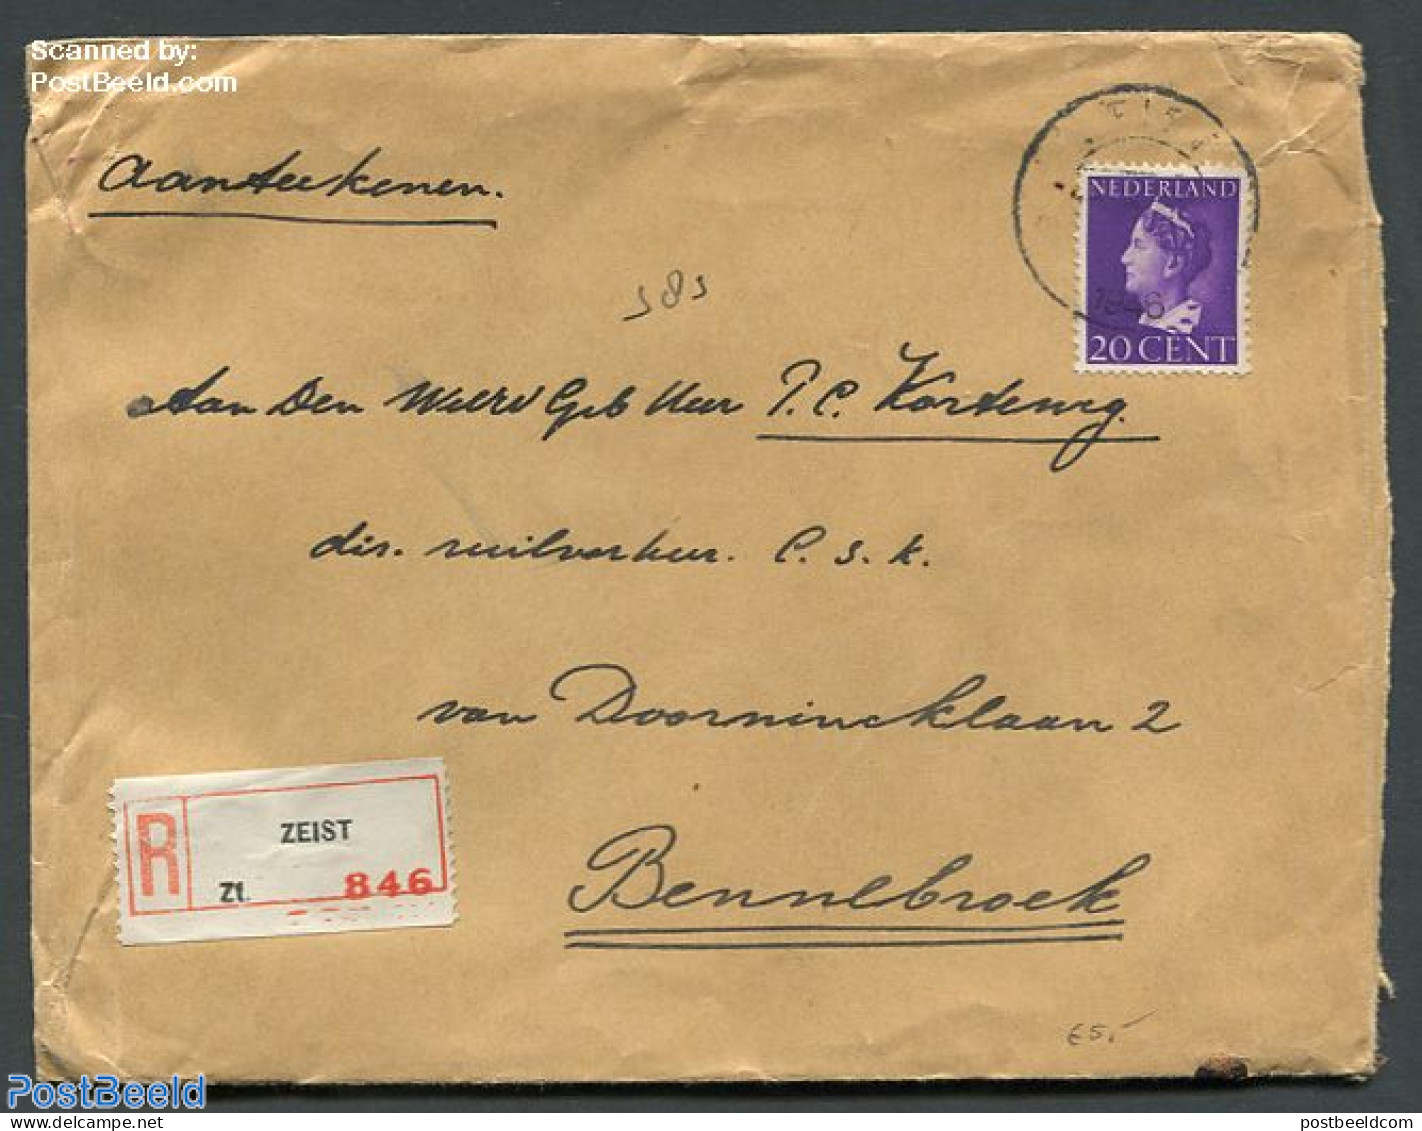 Netherlands 1940 Registered Cover From Zeist To Bennebroek, Postal History, History - Kings & Queens (Royalty) - Covers & Documents